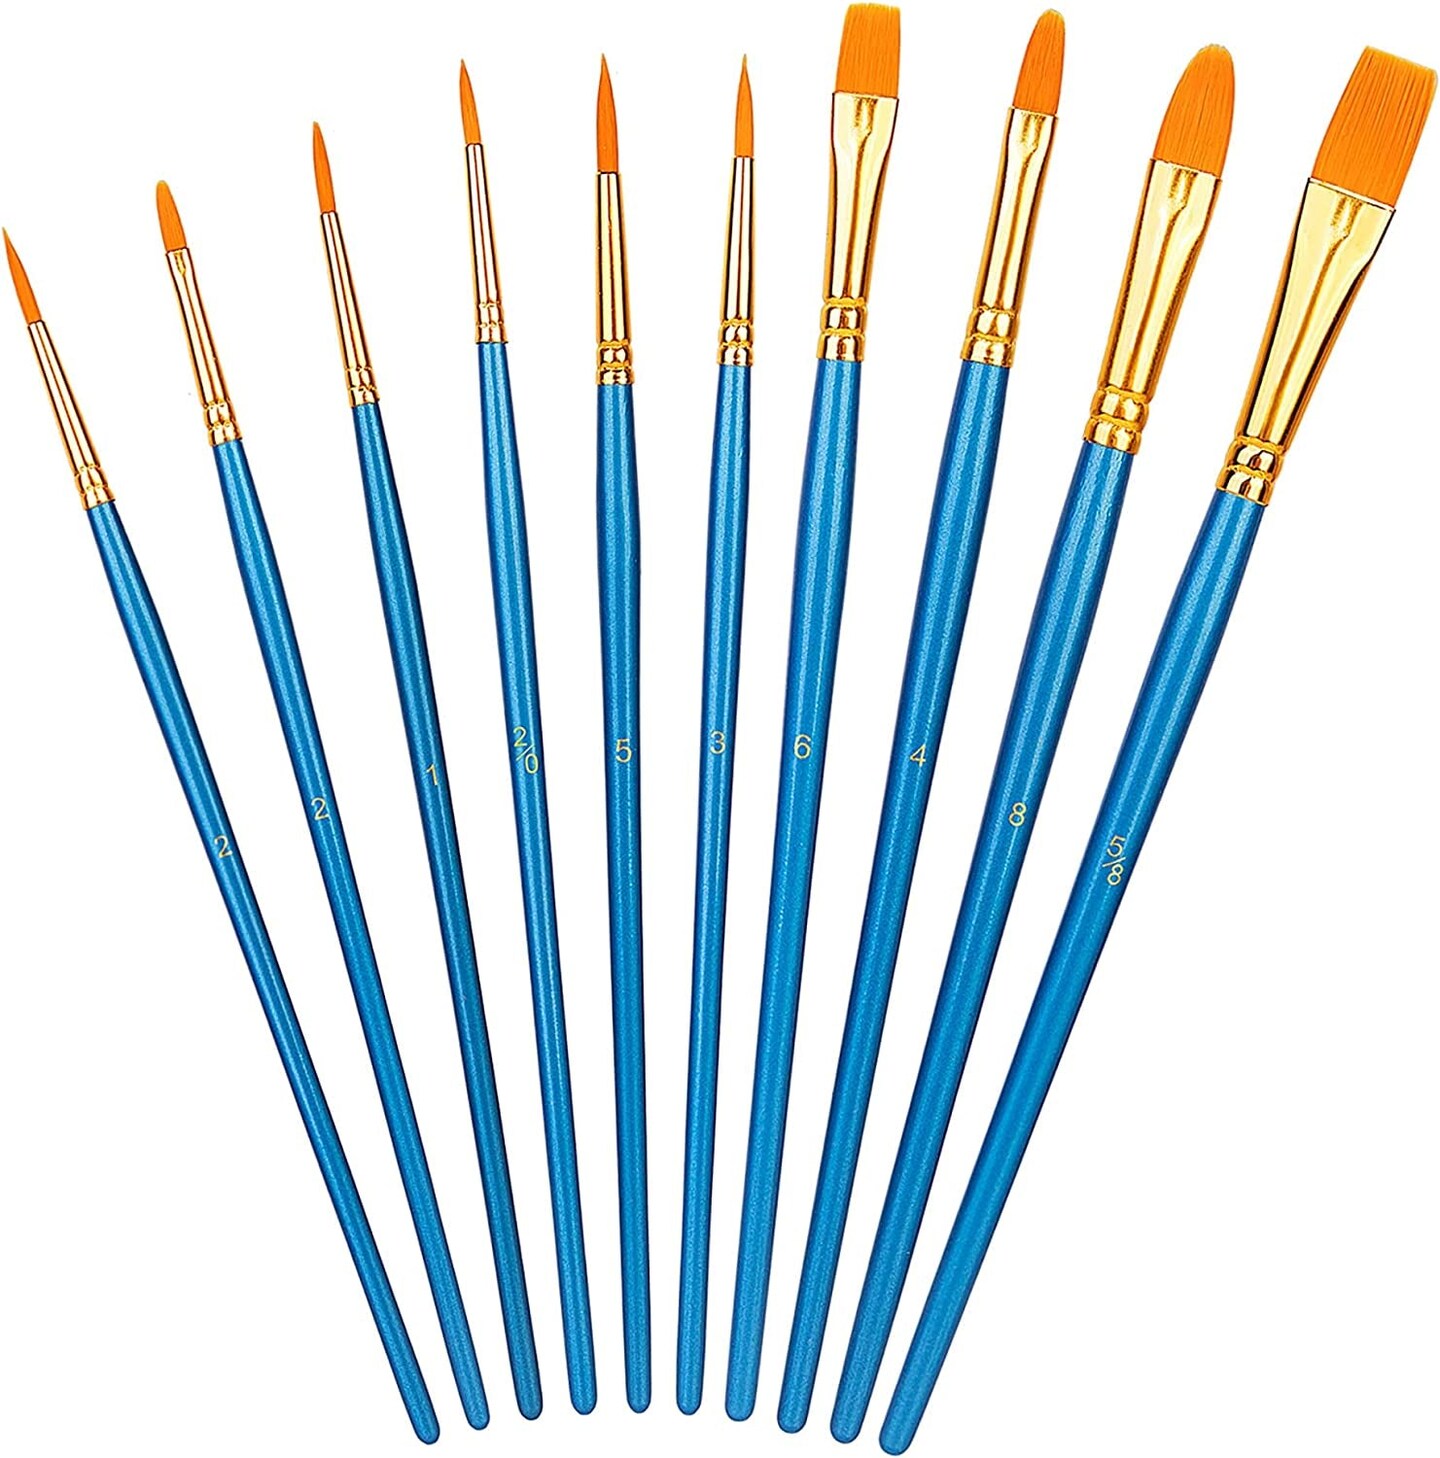 Acrylic/Oil Brushes 10/ Set - MICA Store